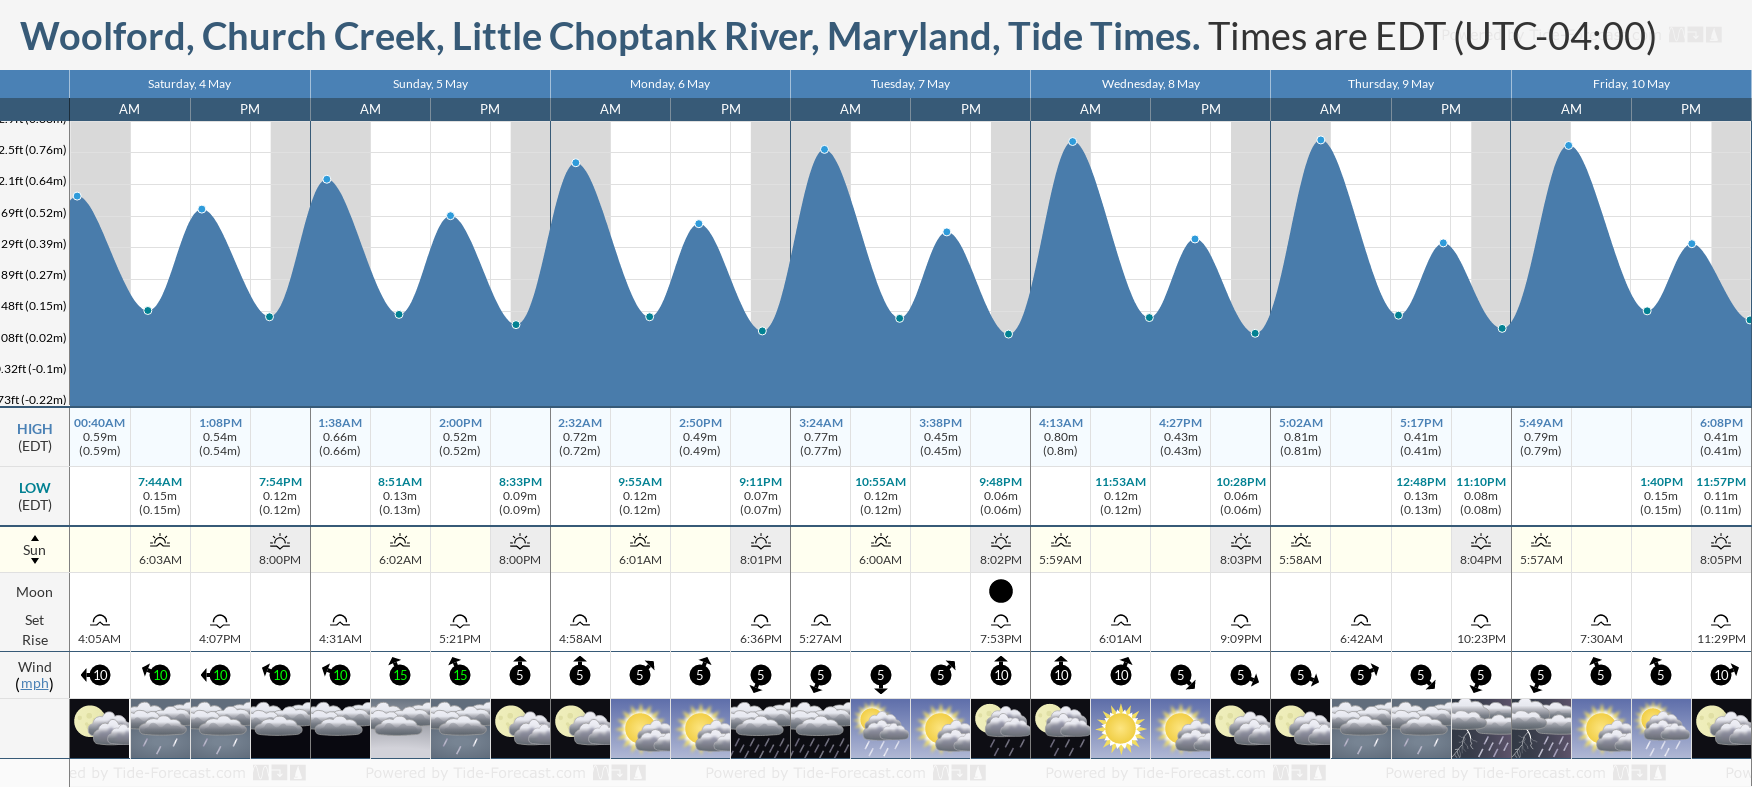 Woolford, Church Creek, Little Choptank River, Maryland Tide Chart including high and low tide tide times for the next 7 days